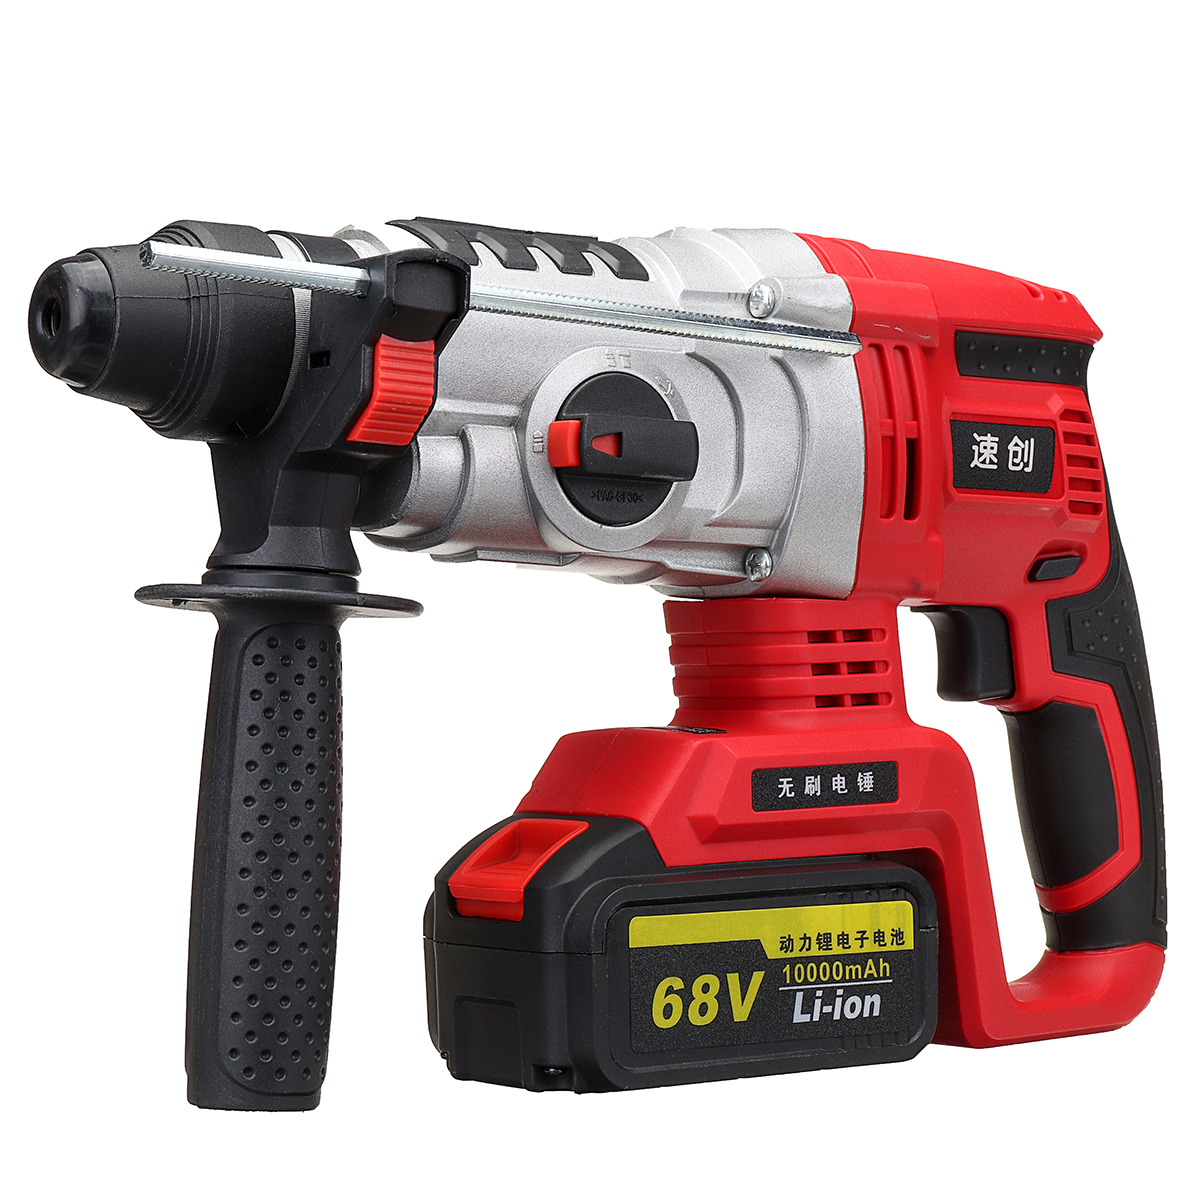 

68V/88V Electric Brushless Hammer Cordless Power Impact Drill with Lithium Battery EU